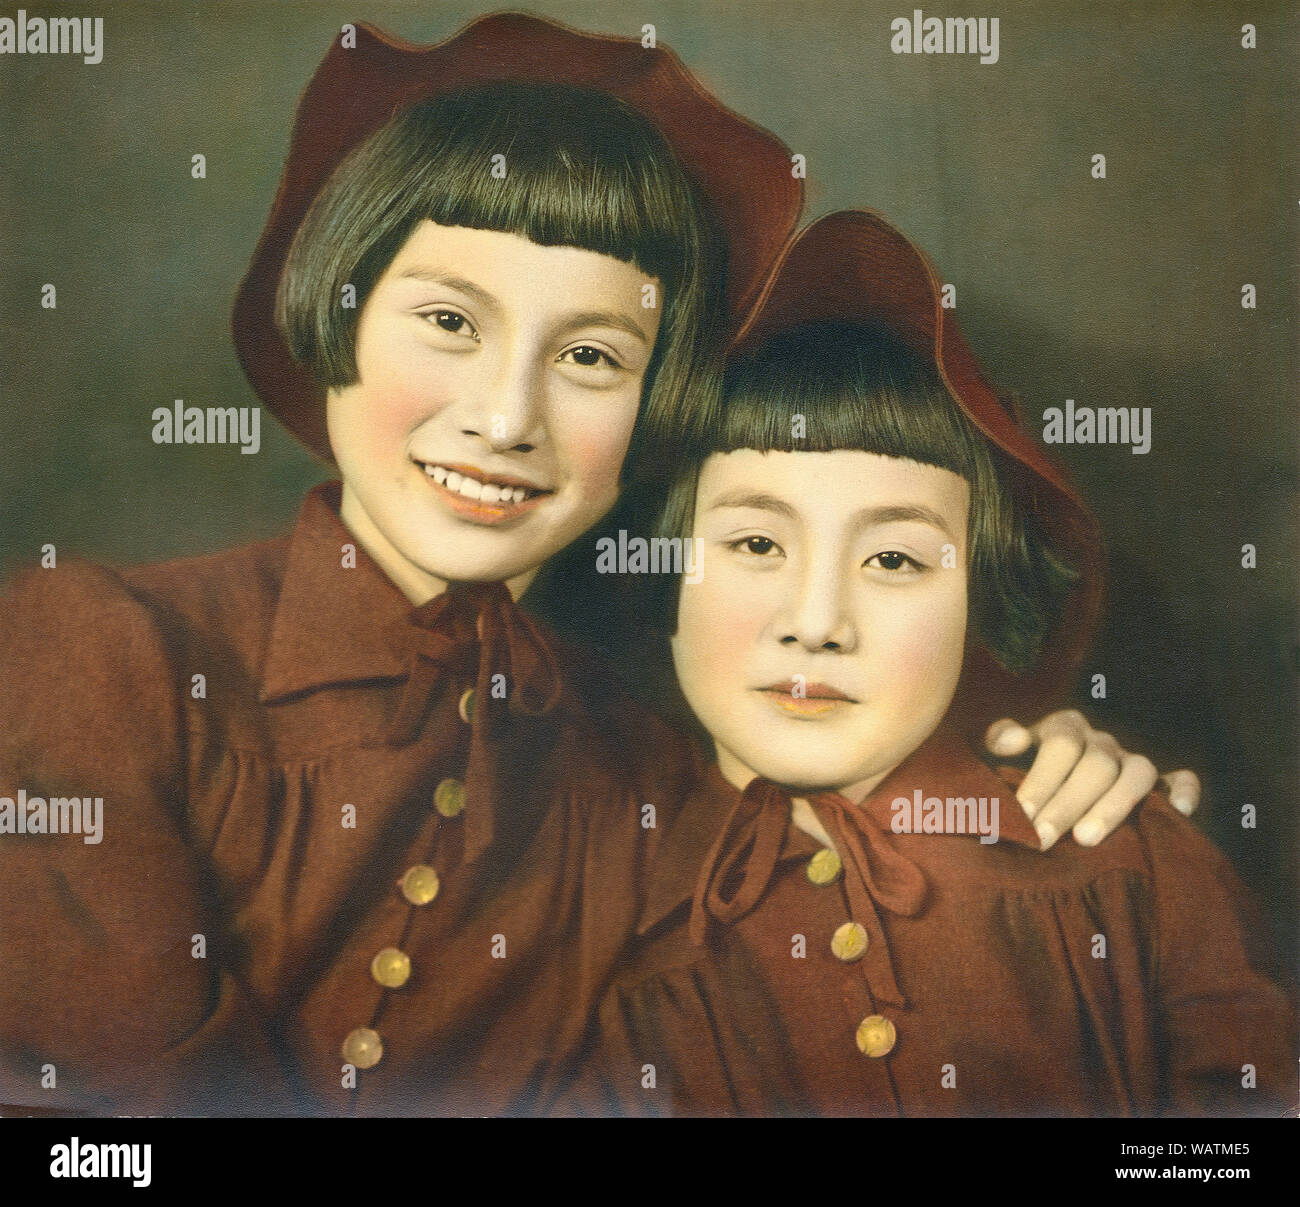 [ 1940s Japan - Two Japanese Sisters ] —   Two sisters. Hand tinted photograph of the late 1930s from the Hanaya Kanbei Studio in Ashiya, Hyogo Prefecture. The girls are actually this famed photographer’s daughters. Stock Photo